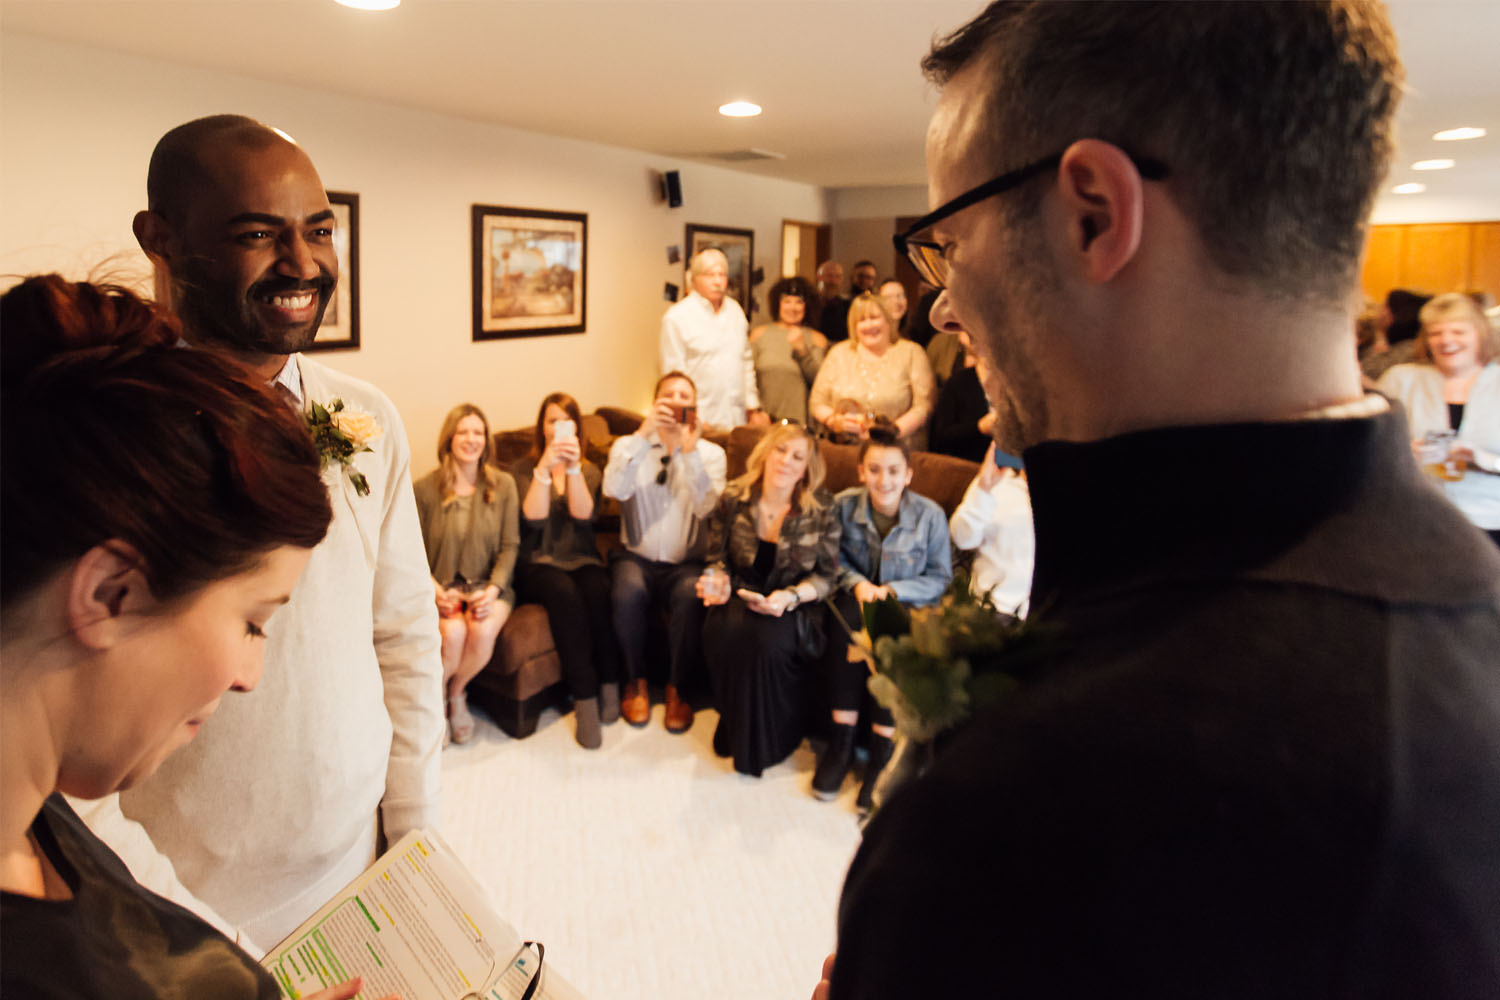 Jamie Johns officiates the marriage between Lance Lewis (left) and Phillip Jefferies (right) as friends and family watch in the background. 